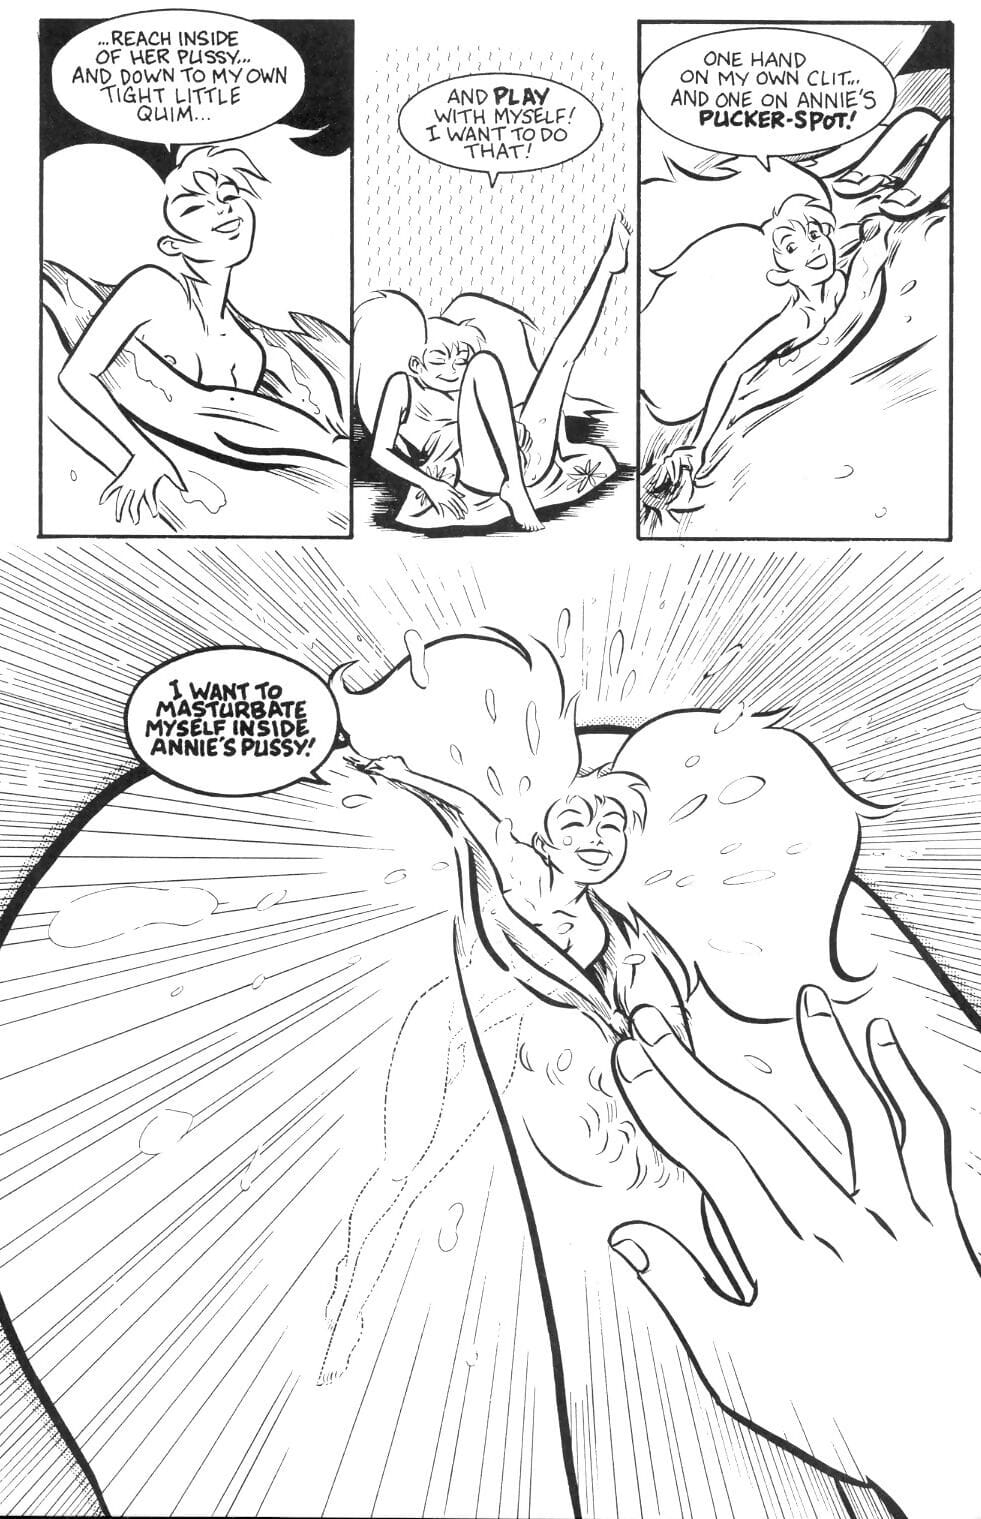 Small Favors Issue #4 ENG page 1